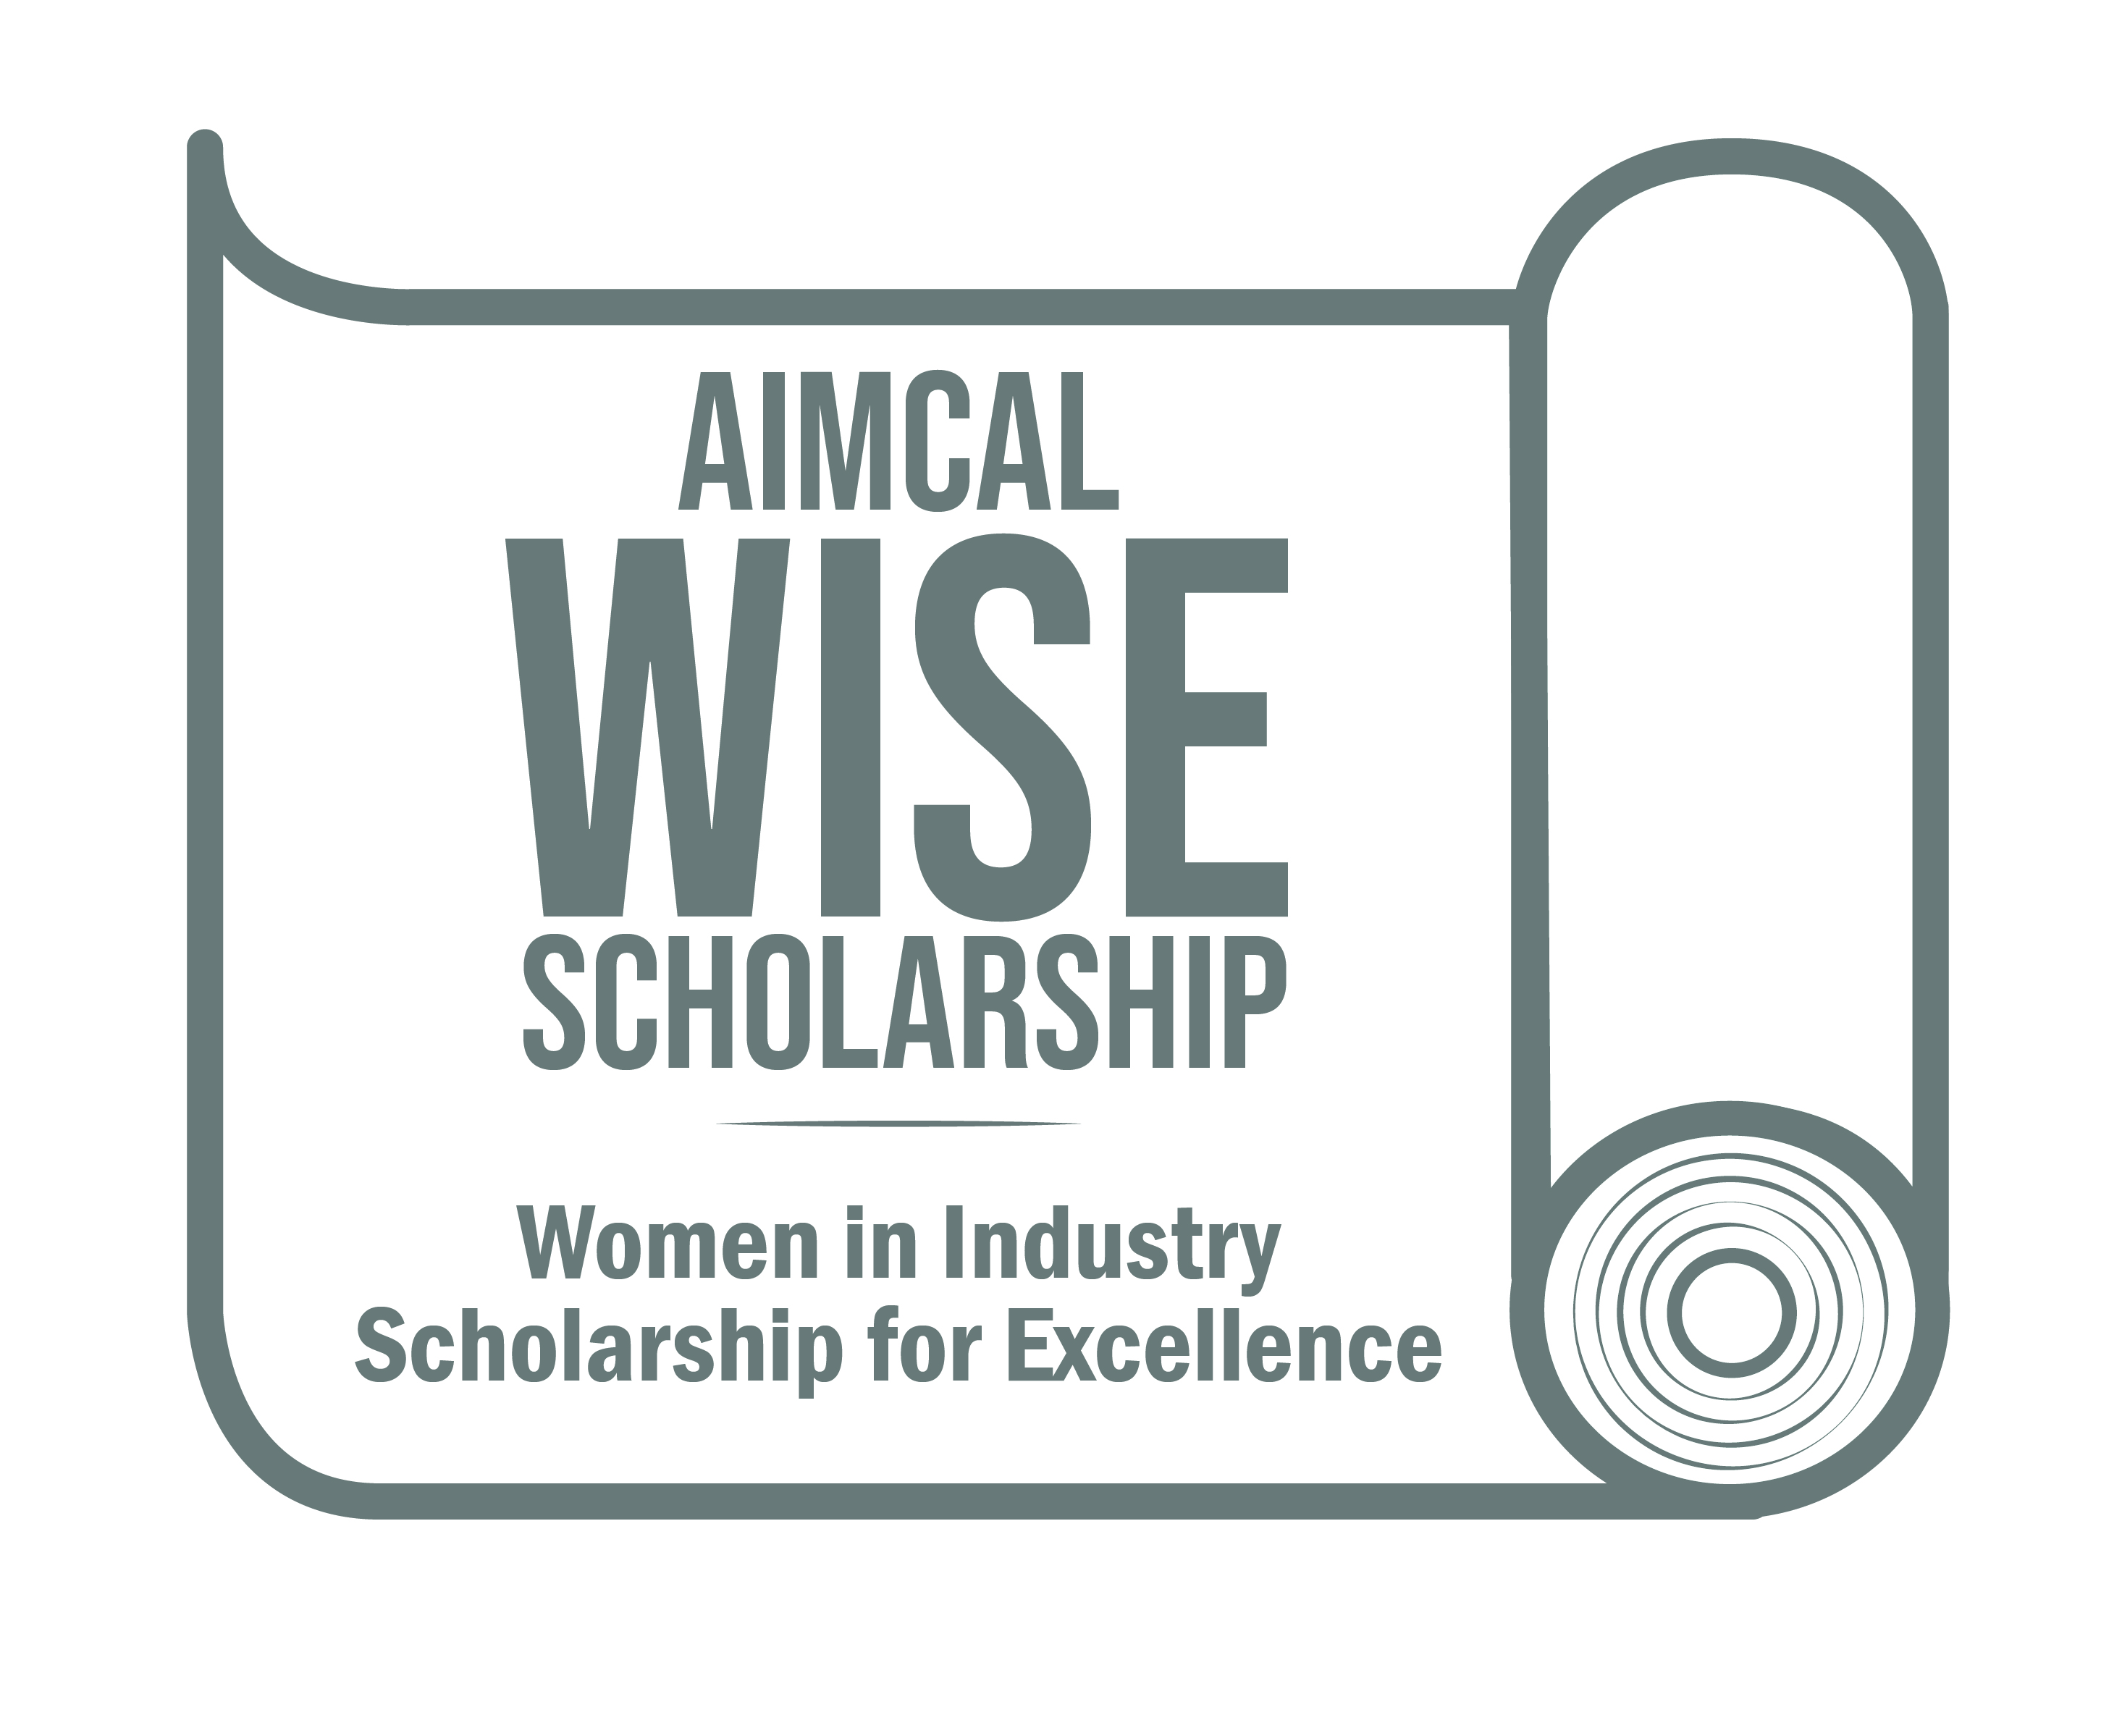 AIMCAL WISE Scholarship Fund - Silver Level